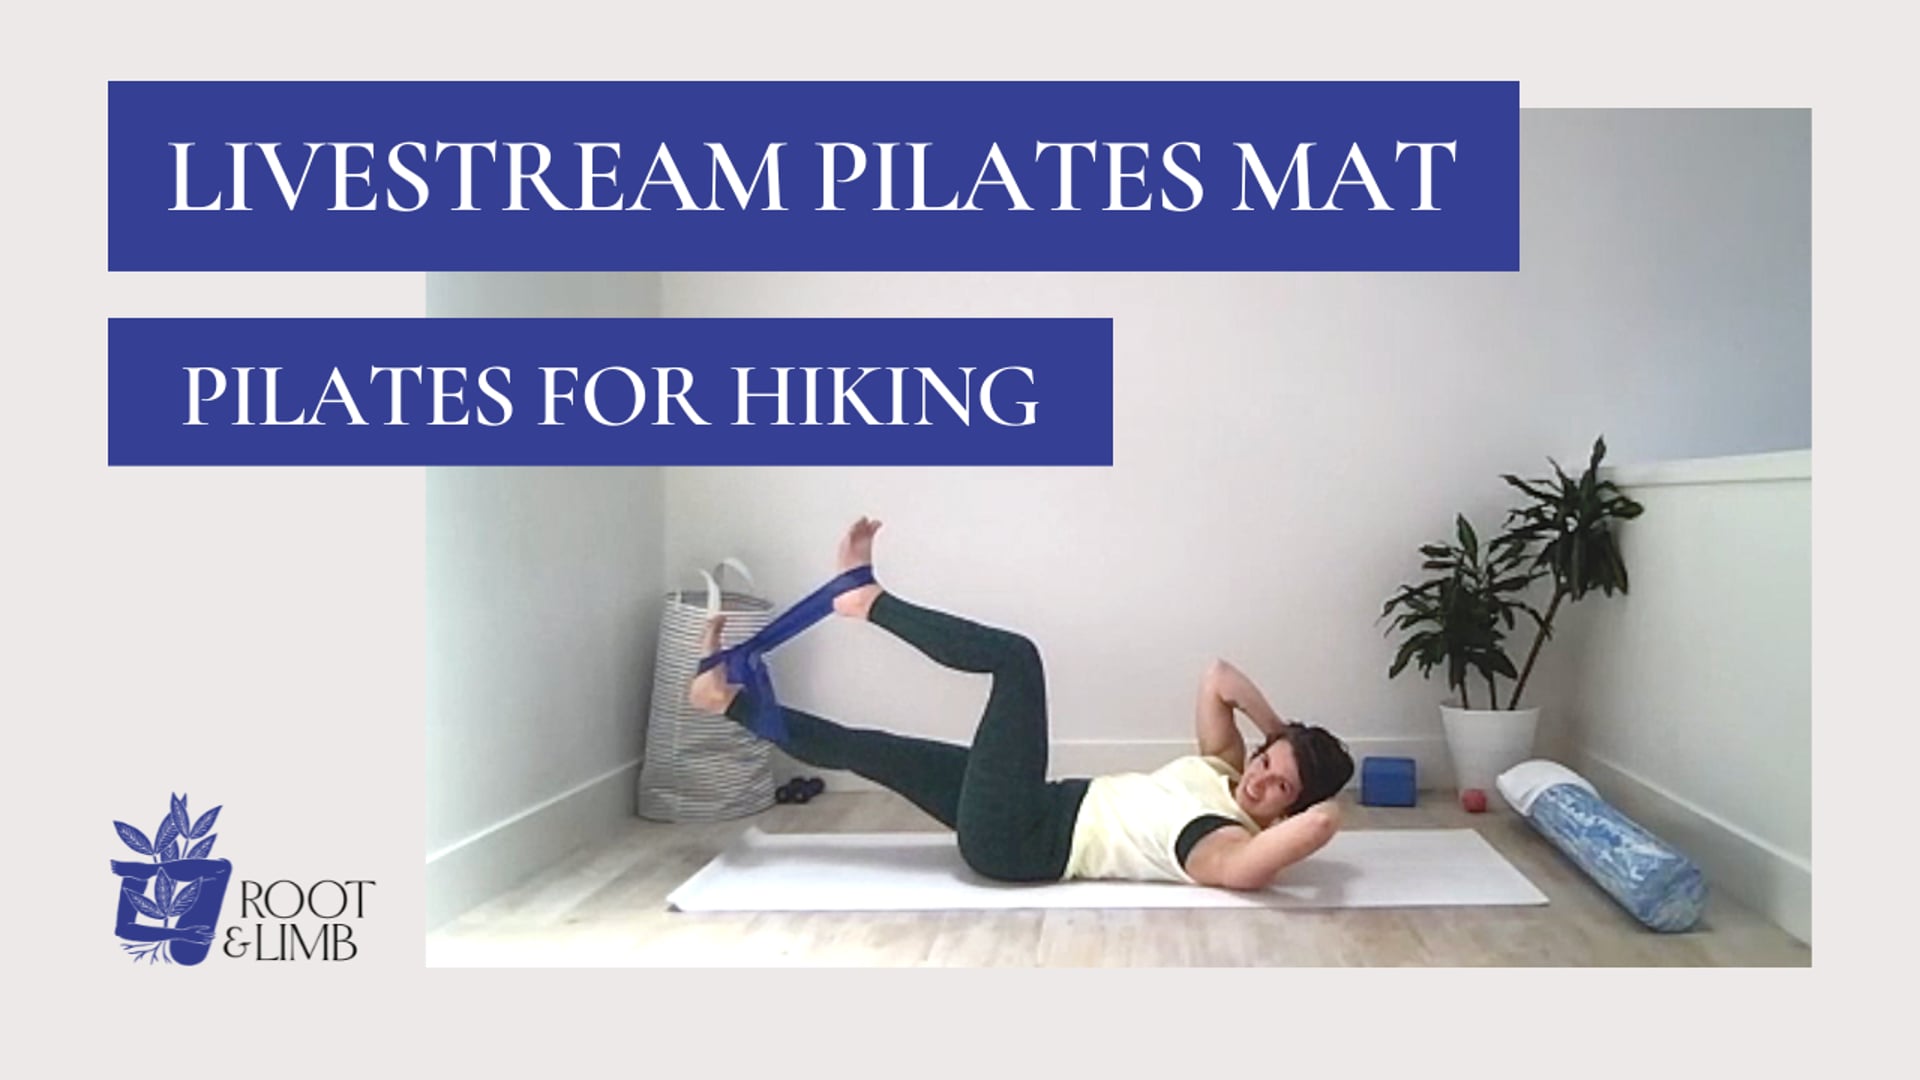 Pilates for Hiking 